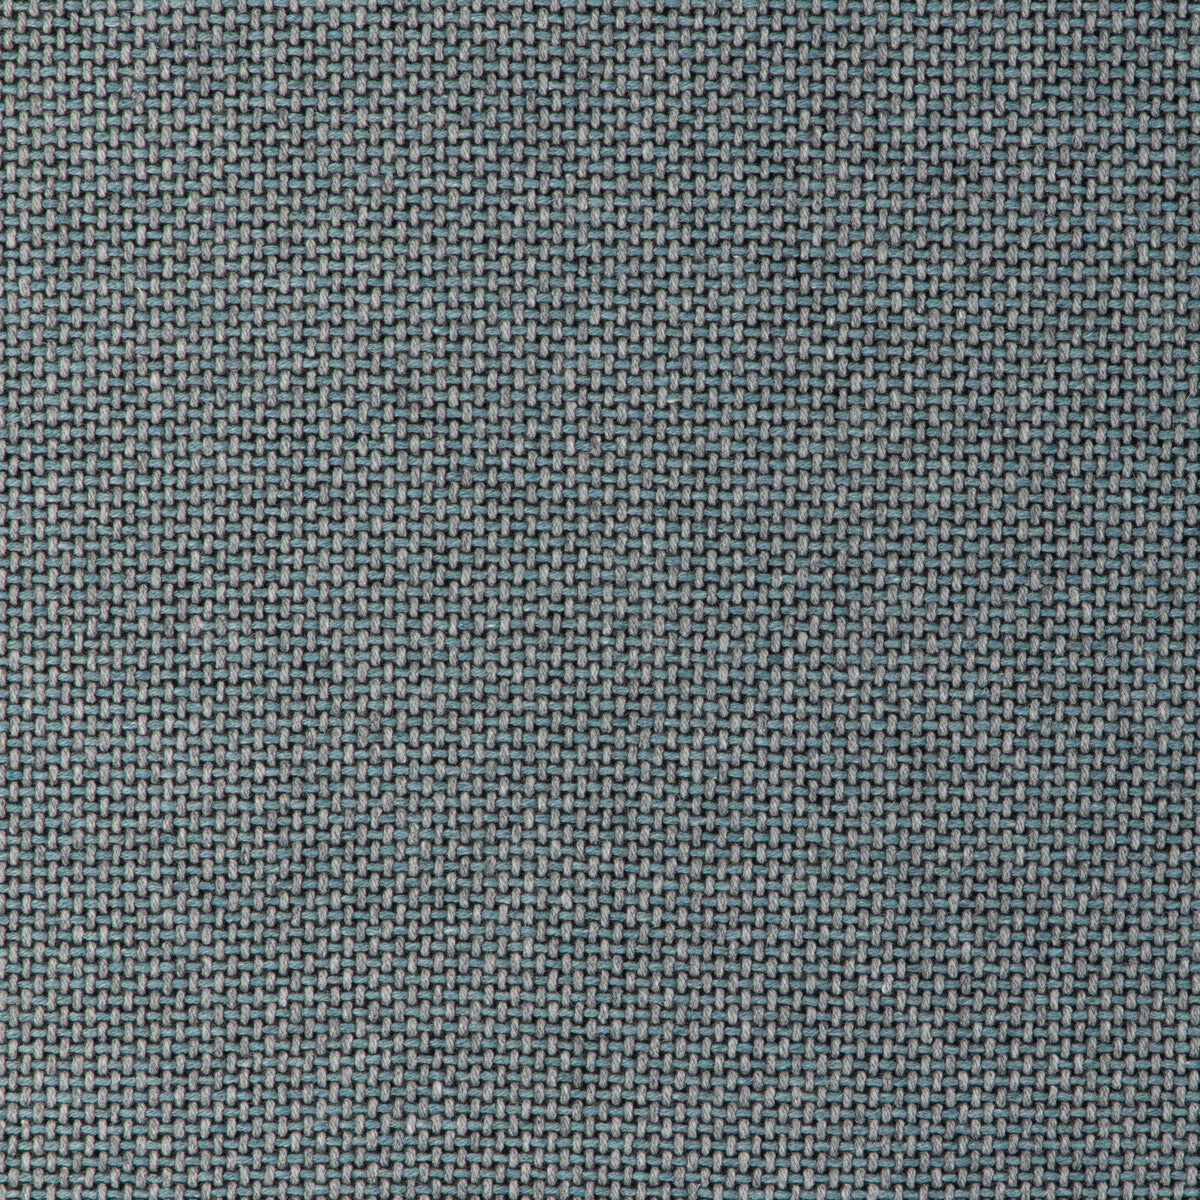 Easton Wool fabric in stonewash color - pattern 37027.1511.0 - by Kravet Contract